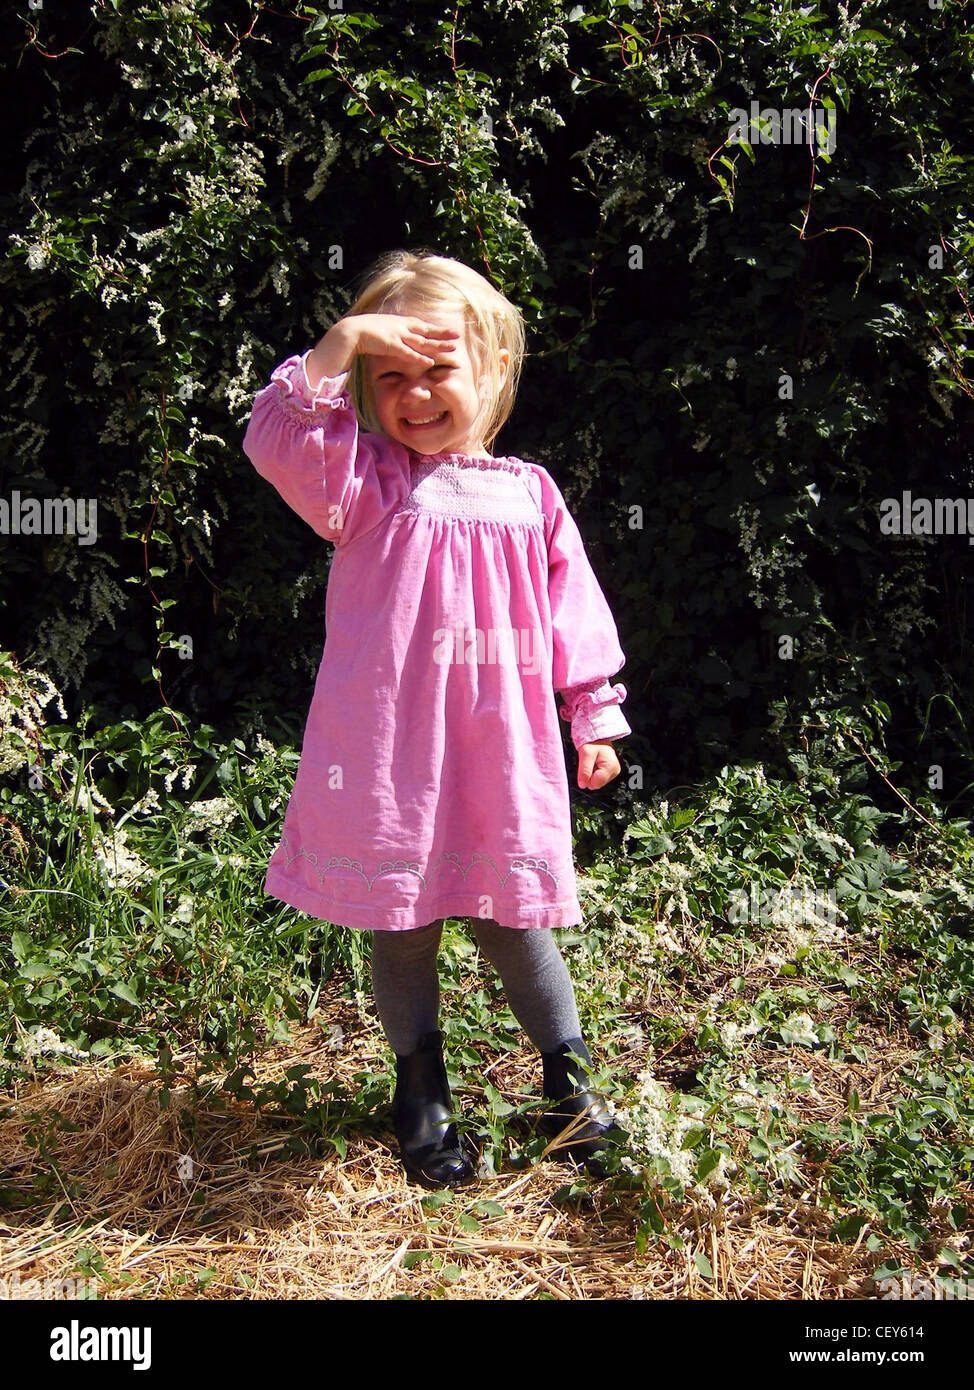 A young blonde female wearing a pink smocked dress grey tights and